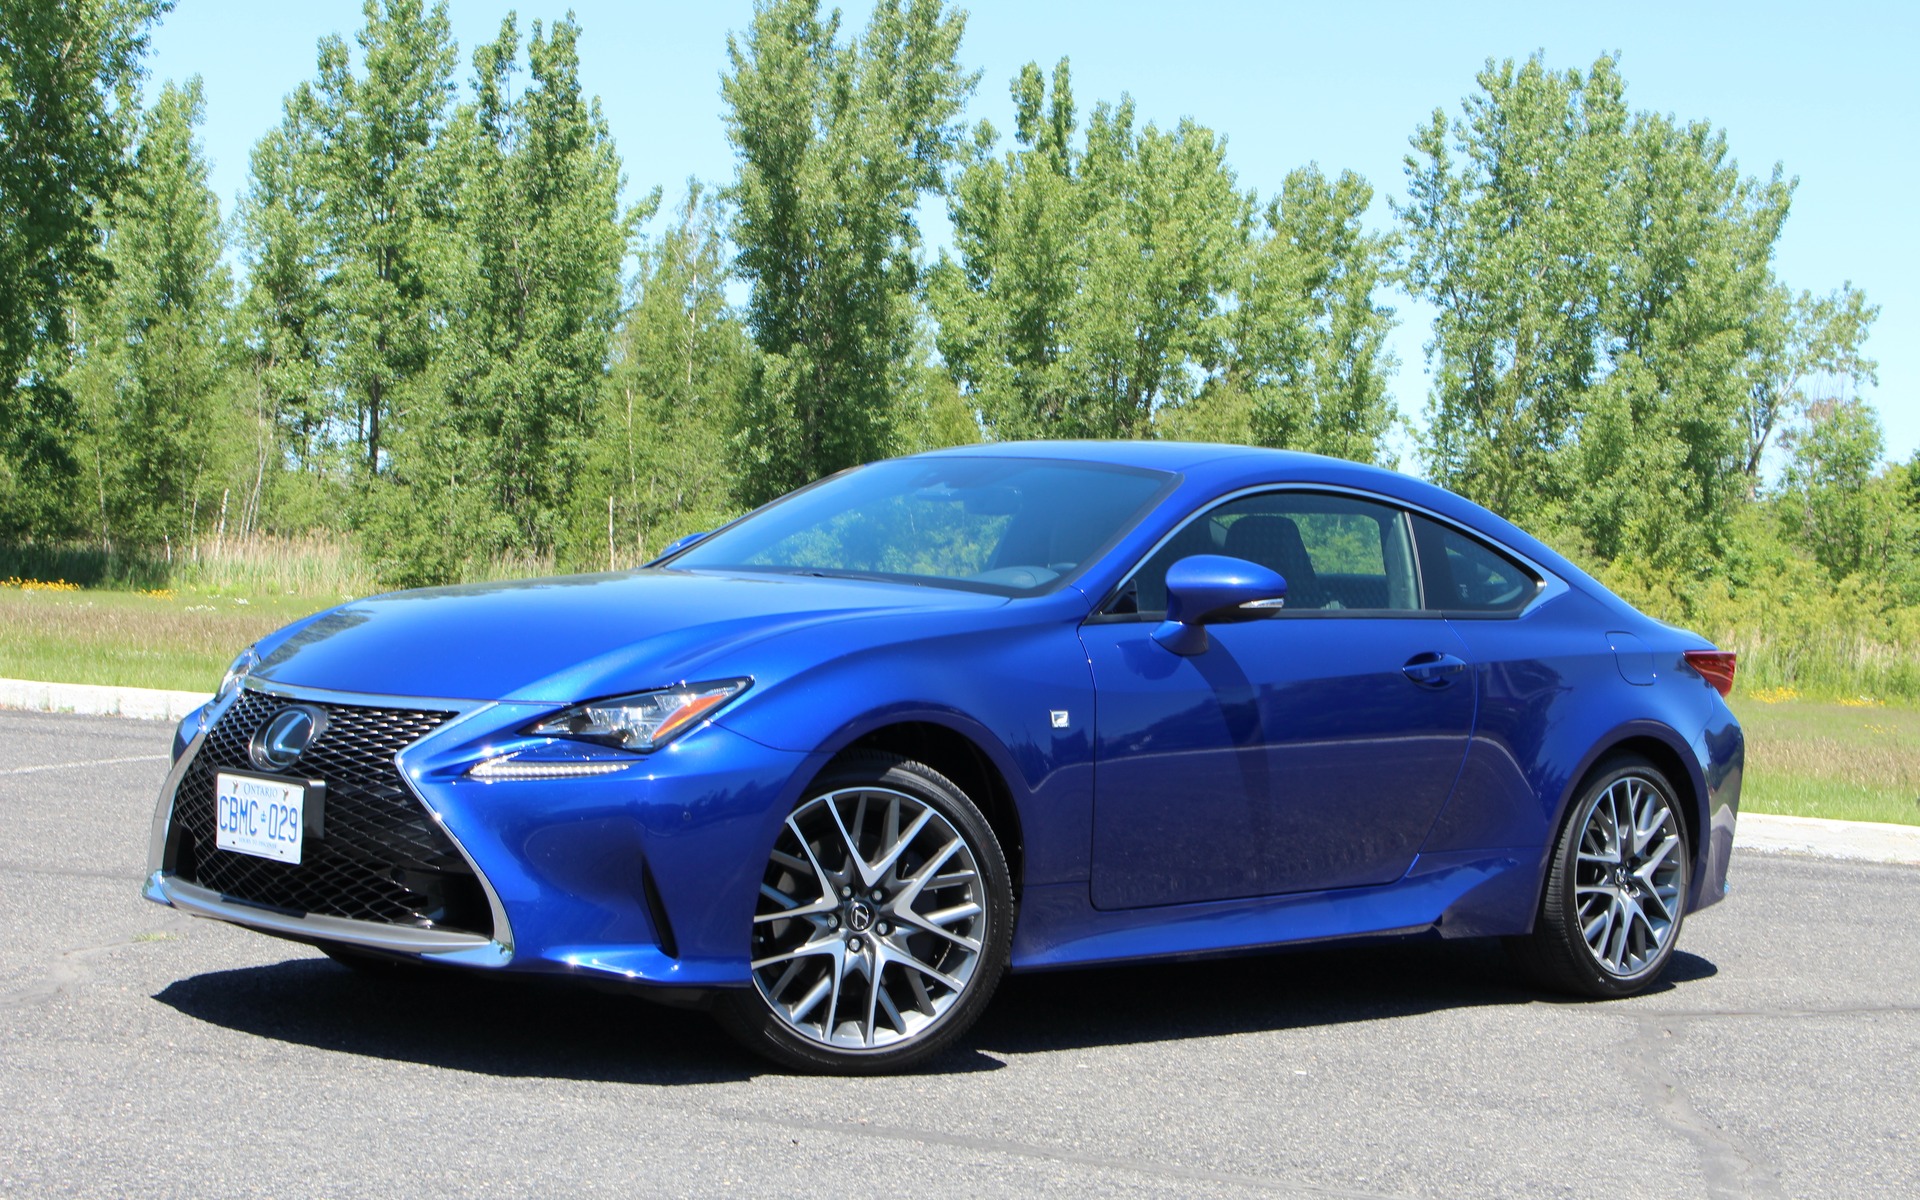 2018 Lexus RC: Off Target - The Car Guide